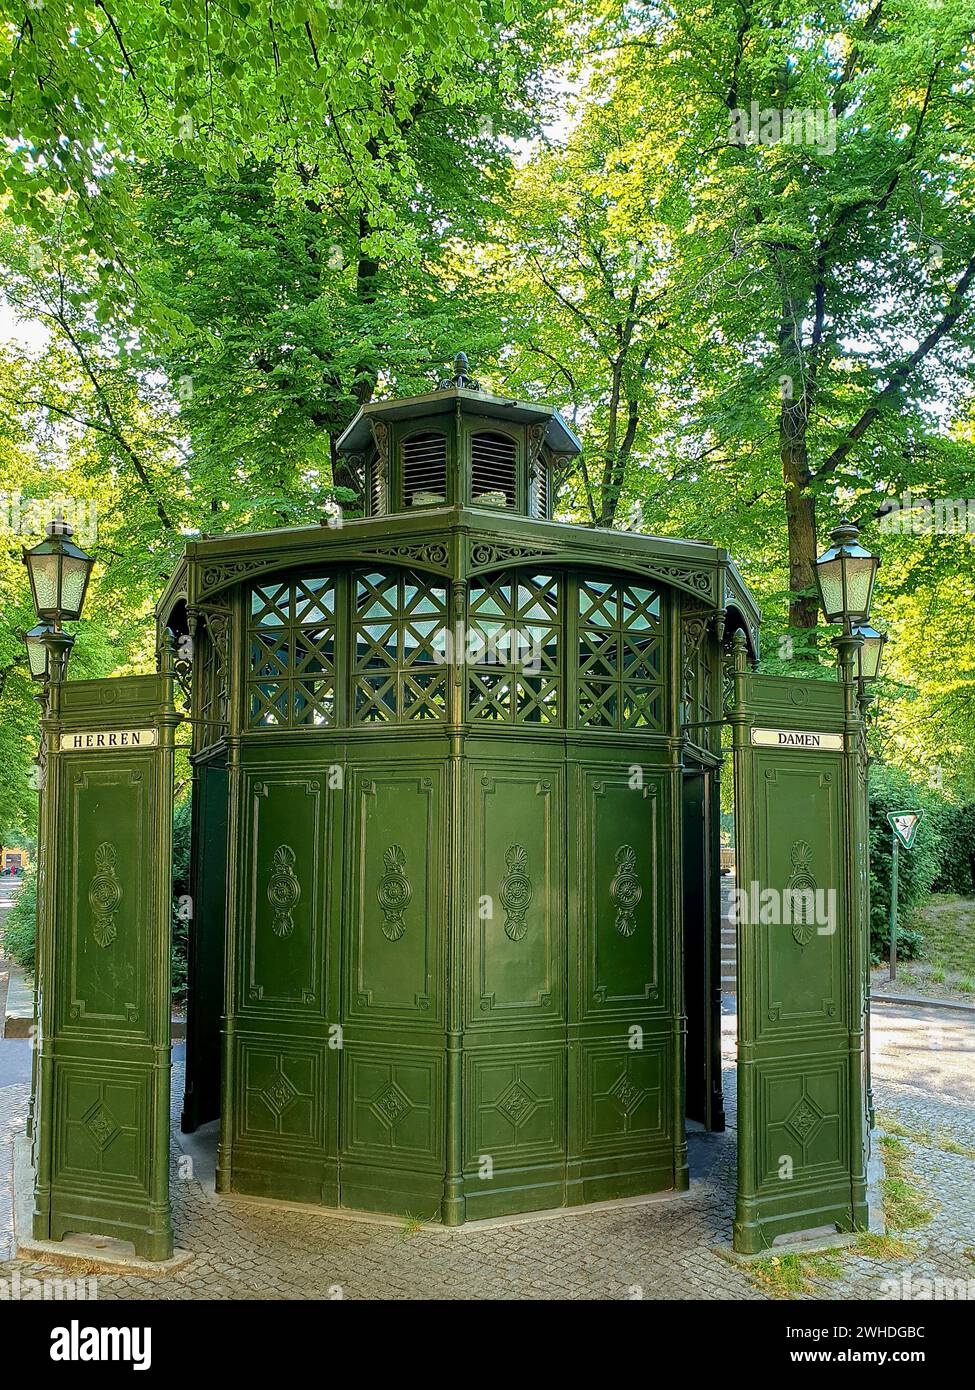 an old public toilet with two entrances for men and women, Rüdesheimer Platz, Wilmersdorf, Berlin, Germany Stock Photo